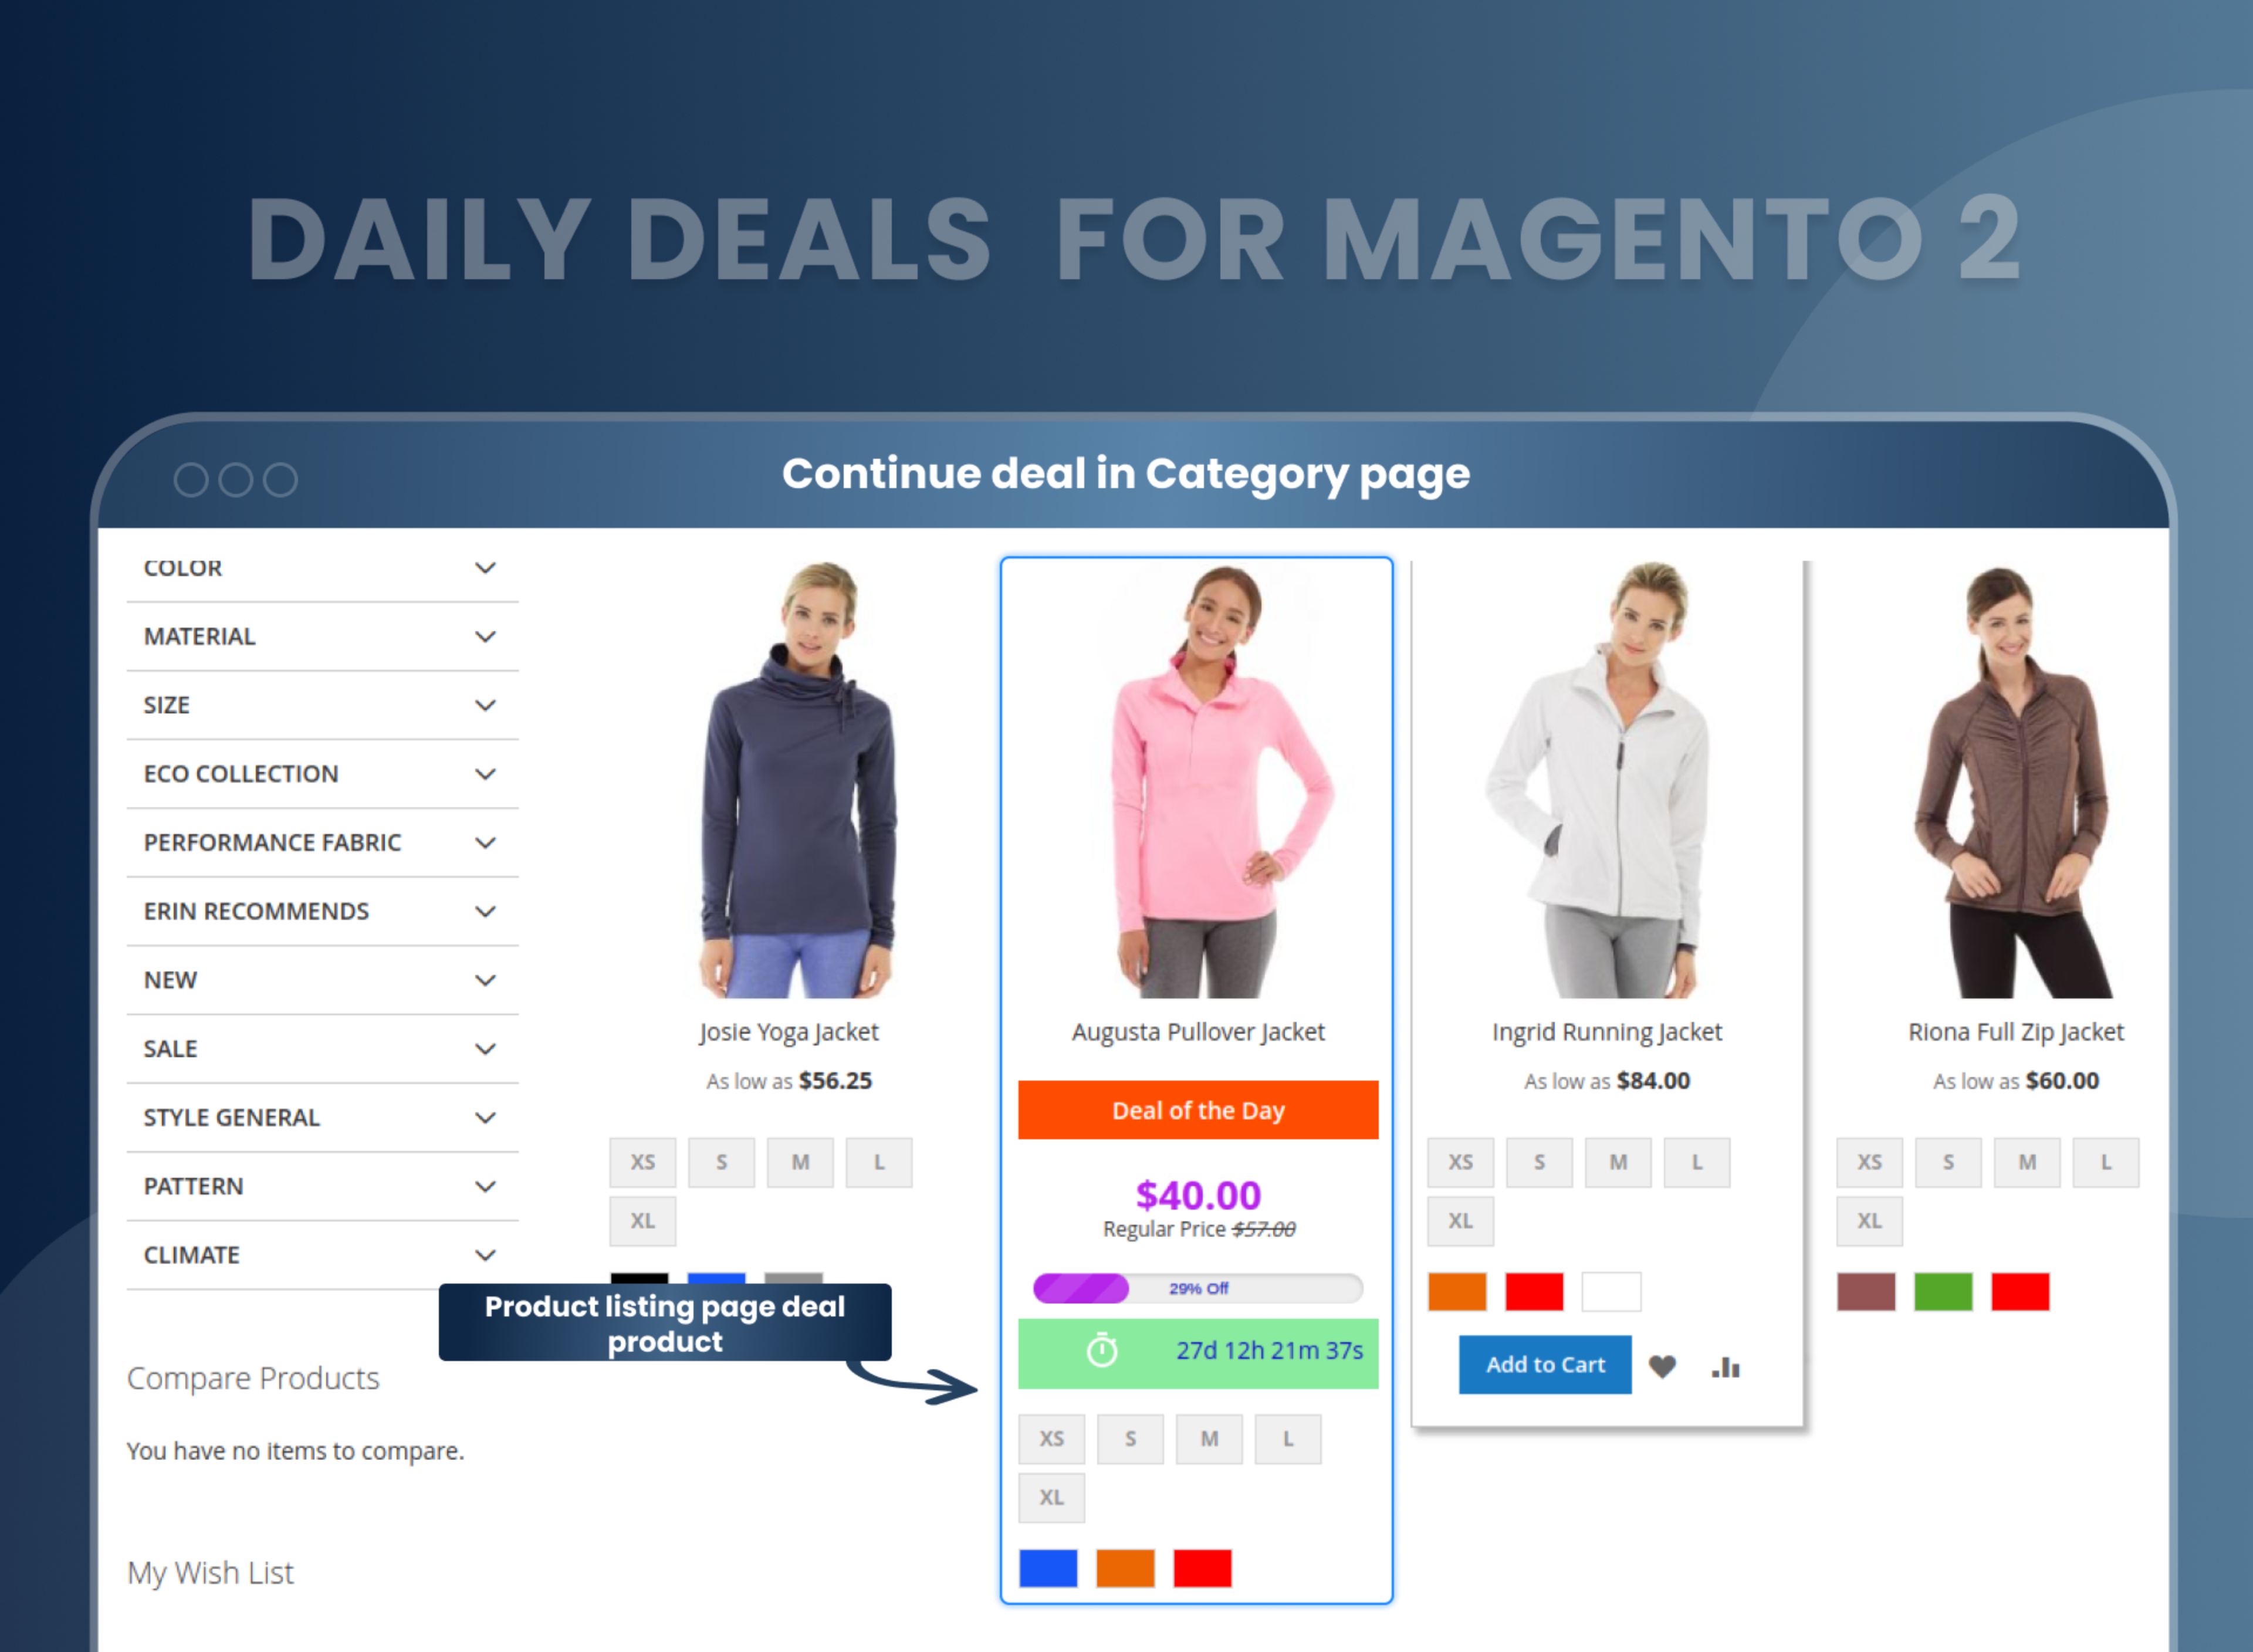 Continue deal in Category page